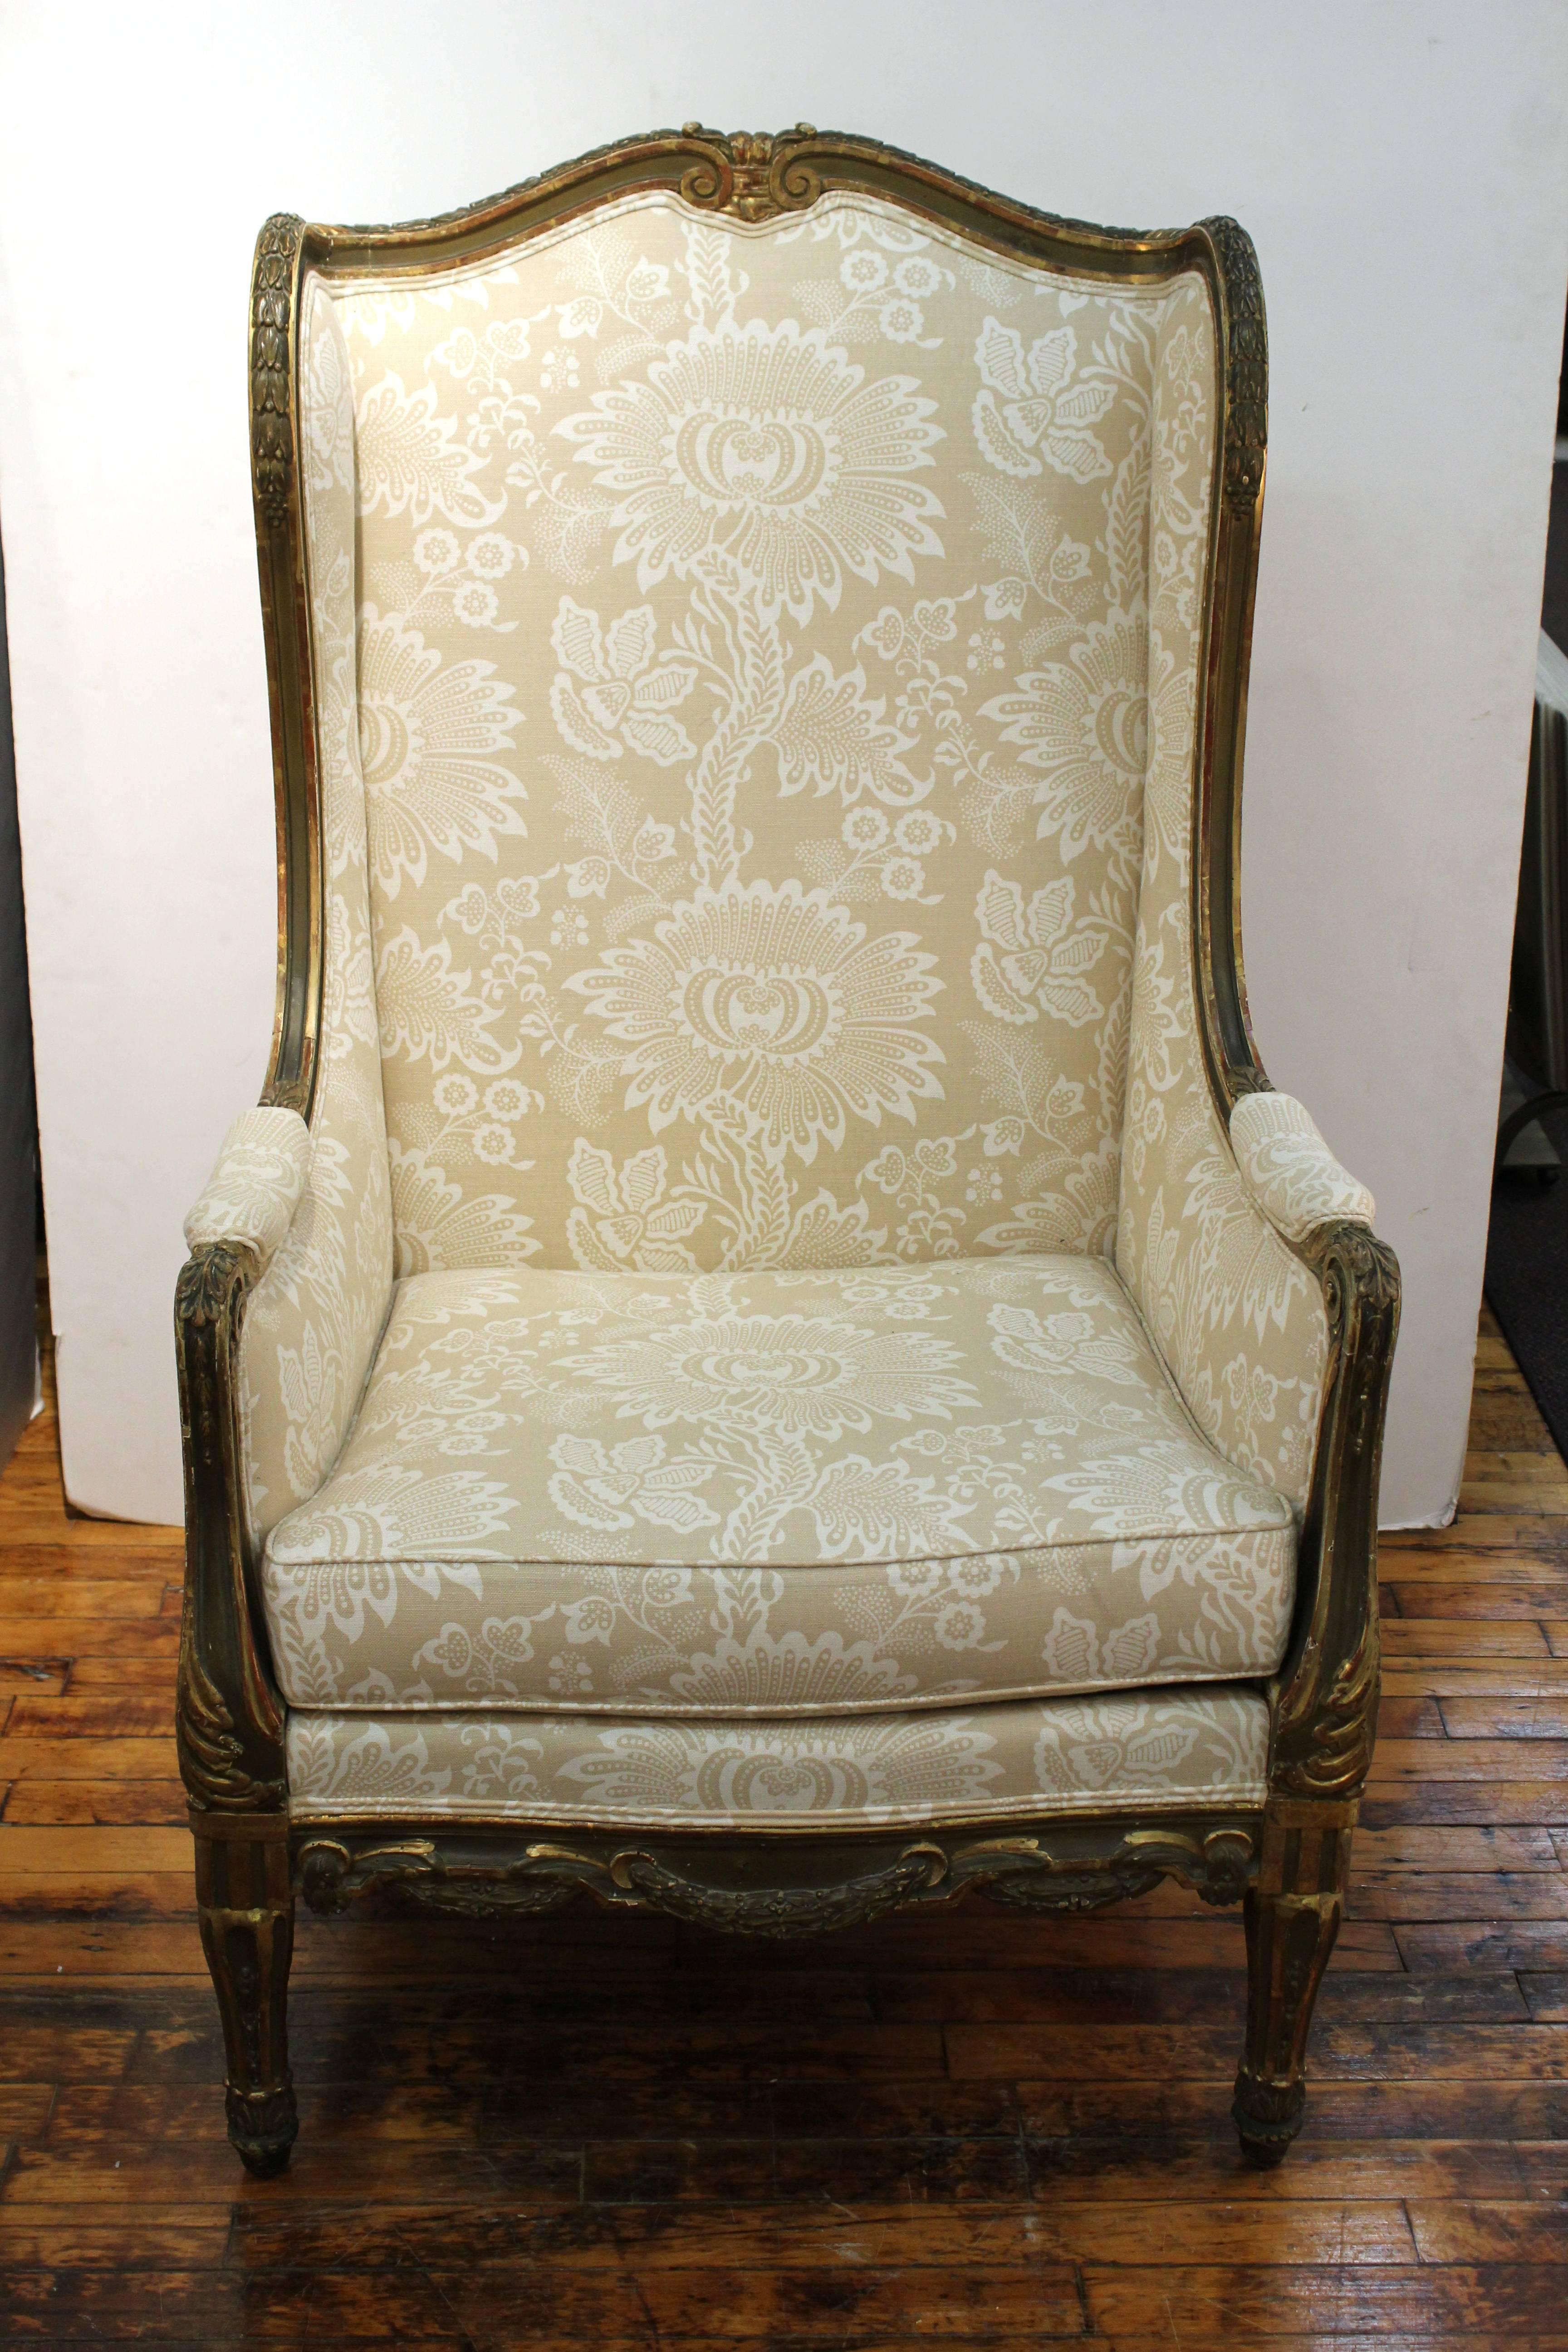 A 19th century French bergère wingback armchair in Louis XVI style. The giltwood frame has delicately carved motifs and tapered fluted legs. Wear appropriate to age and use, in good condition.